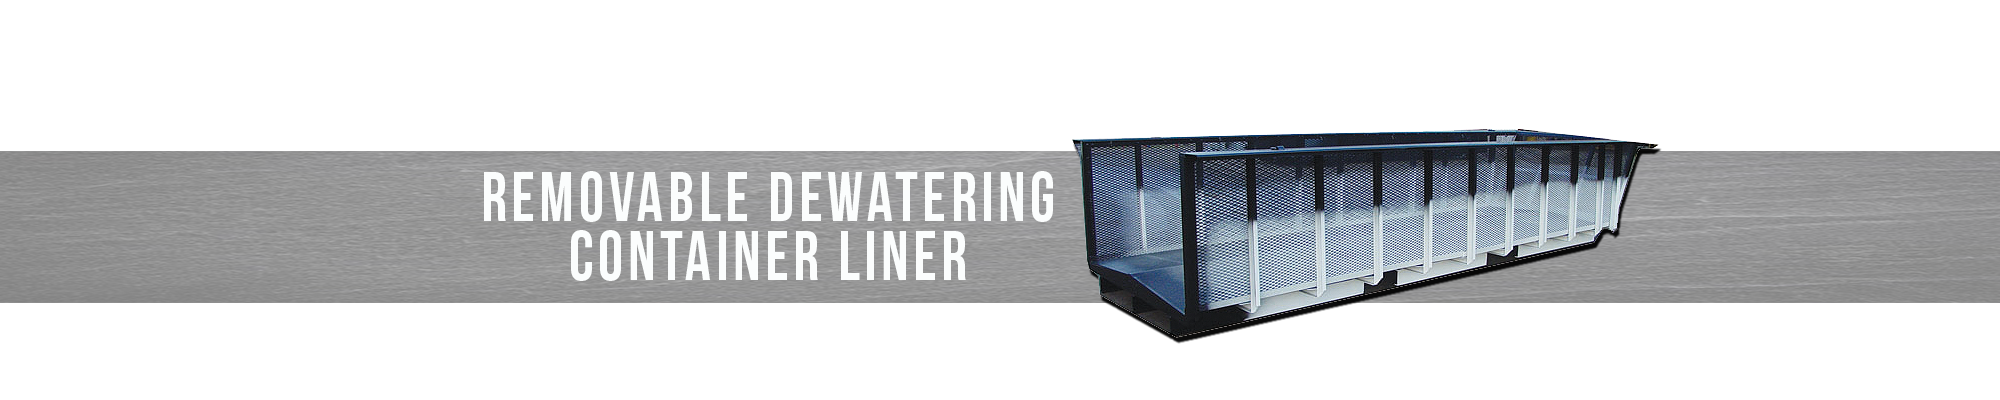 Removable Dewatering Container Liner